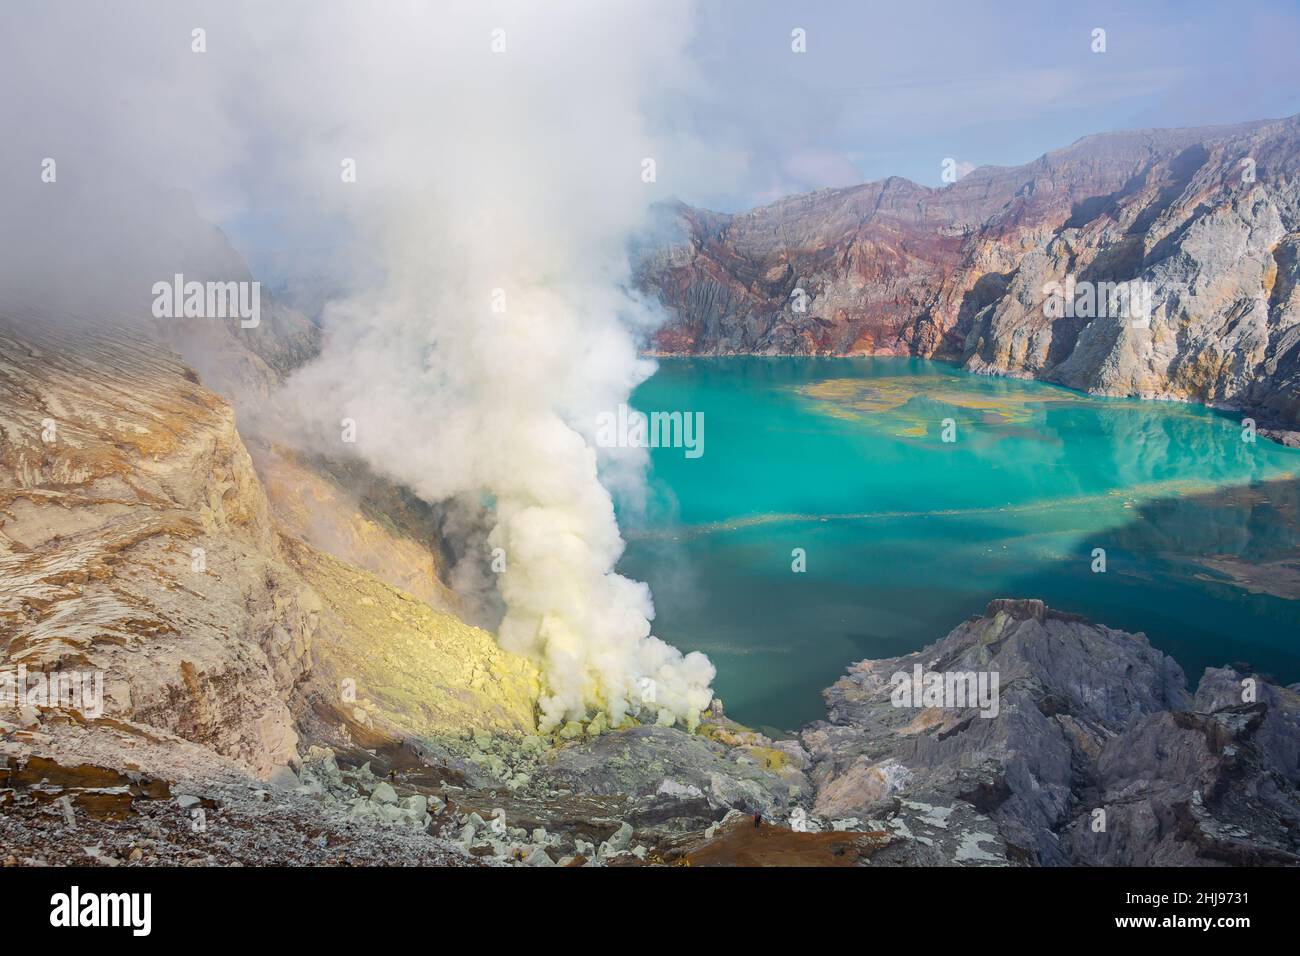 Sulfurous smokes from the volcano are the source of the sulfur mine. The water of the lake is highly aciduous. Stock Photo